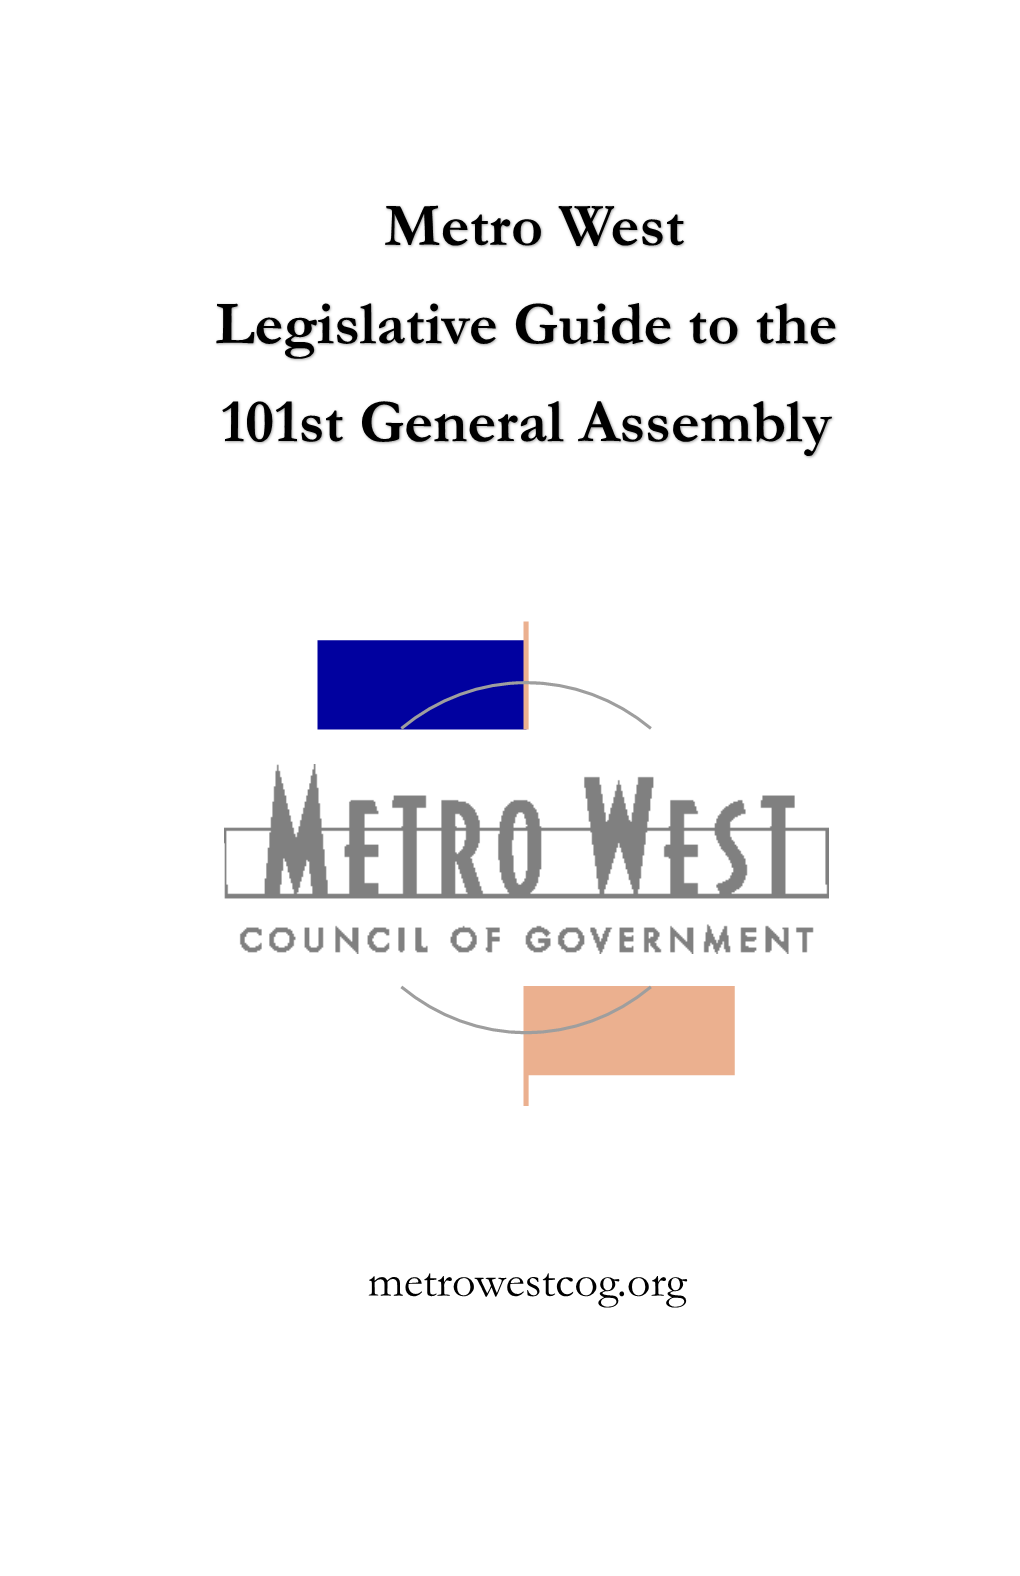 Metro West Legislative Guide to the 101St General Assembly